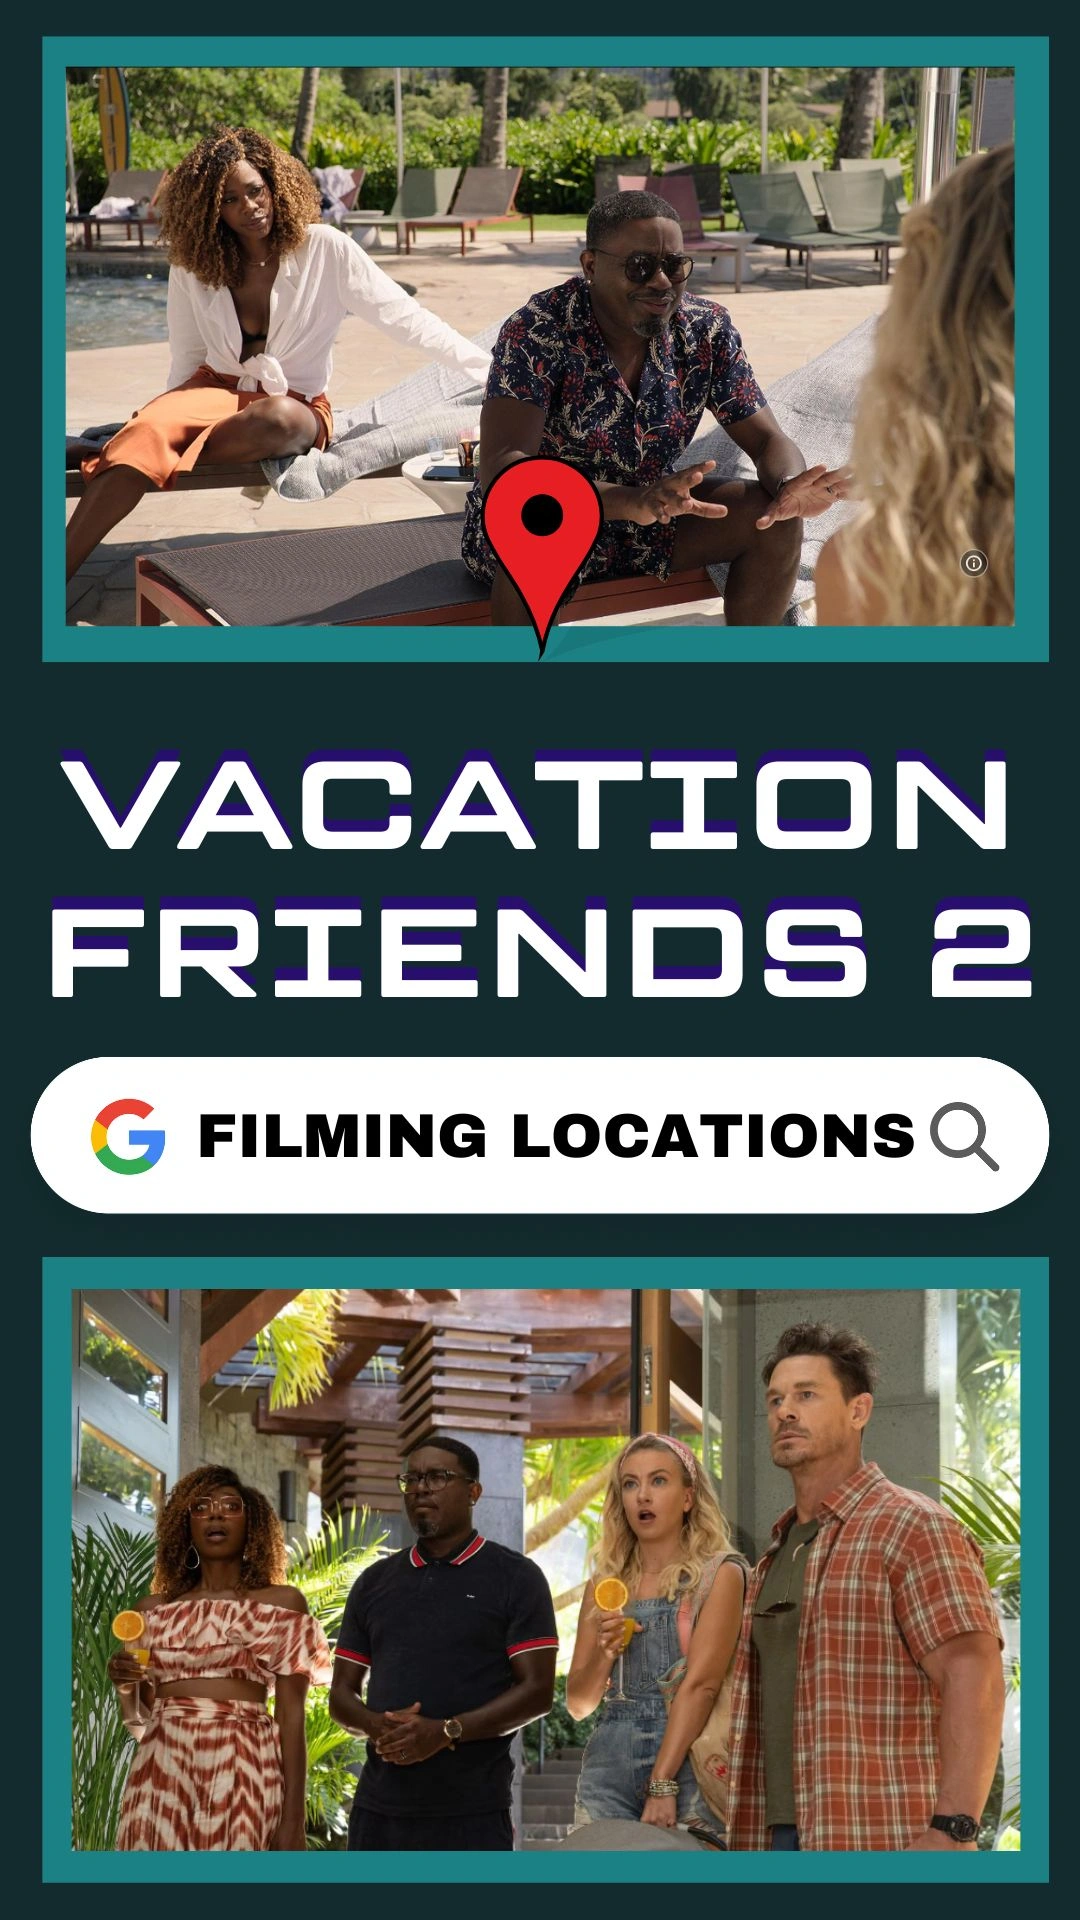 Vacation Friends 2 Filming Locations